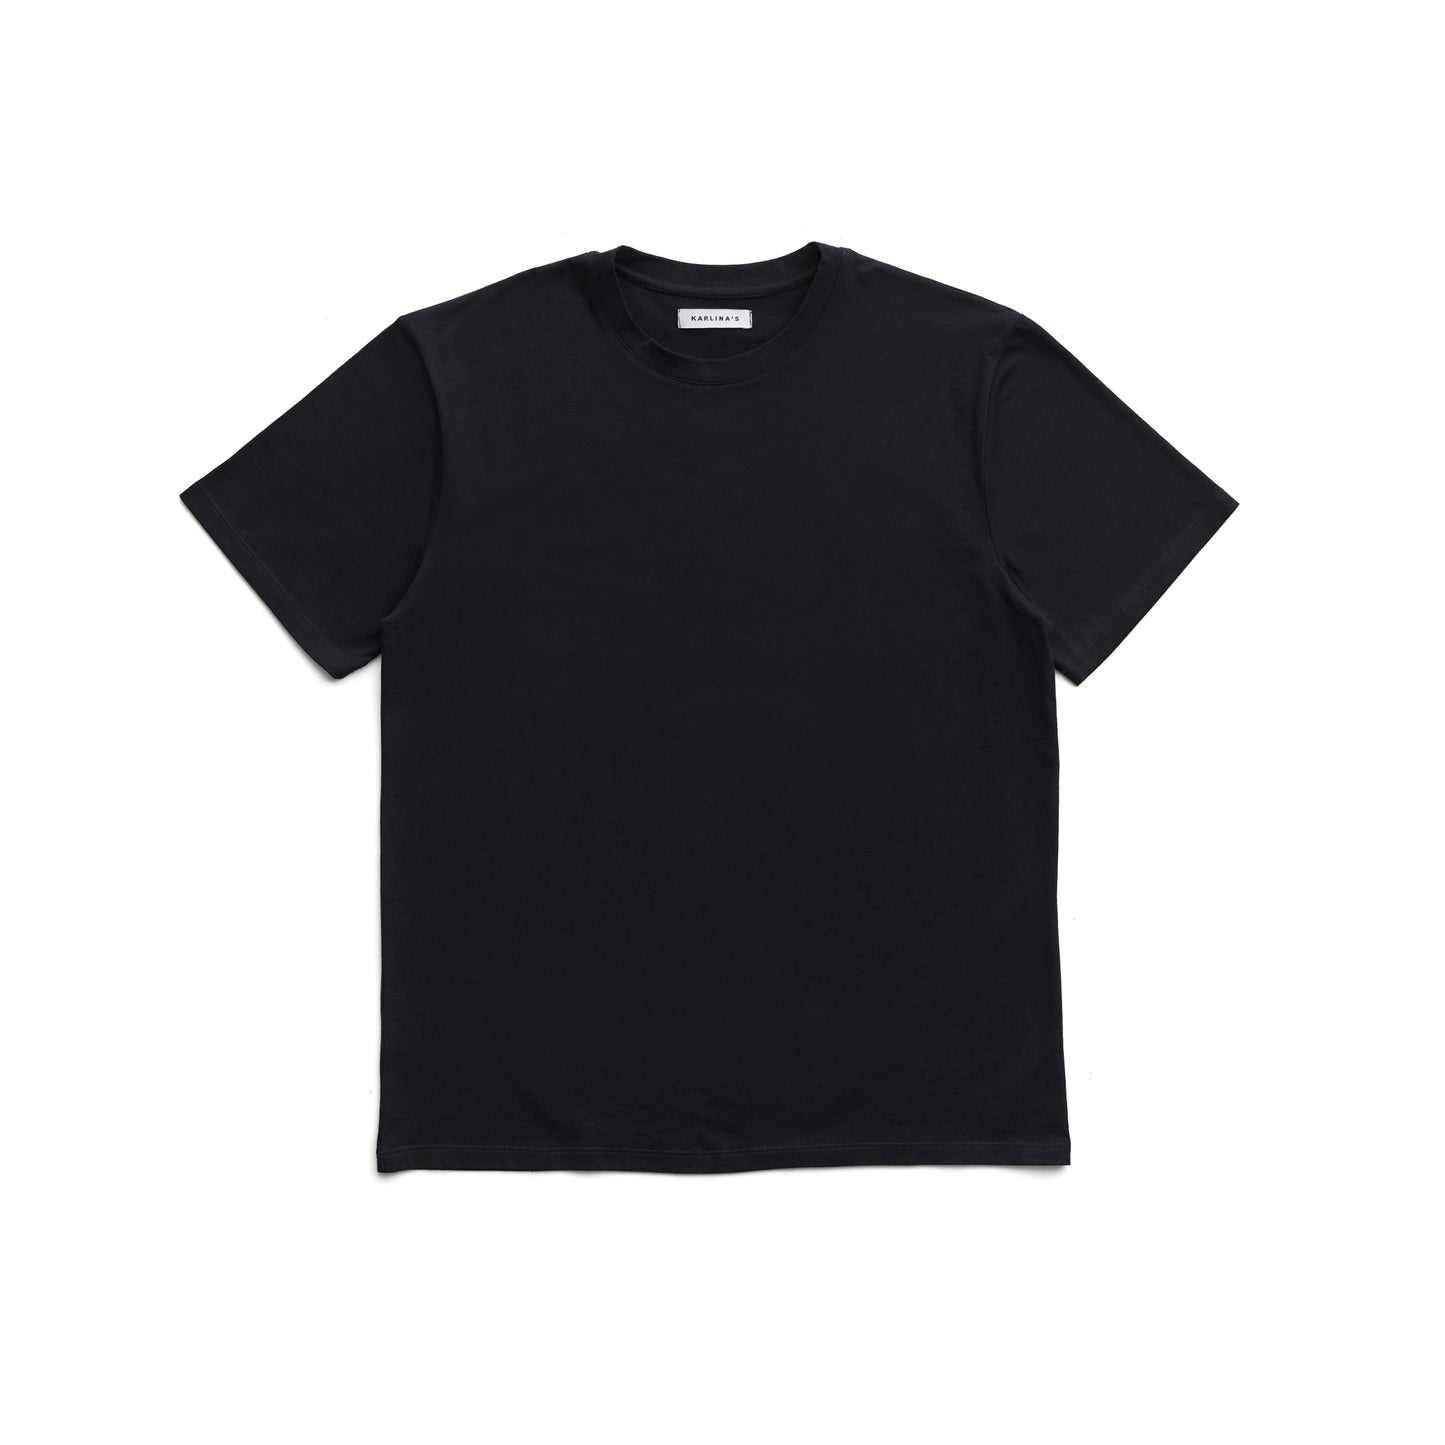 Ludde T-shirt in Black